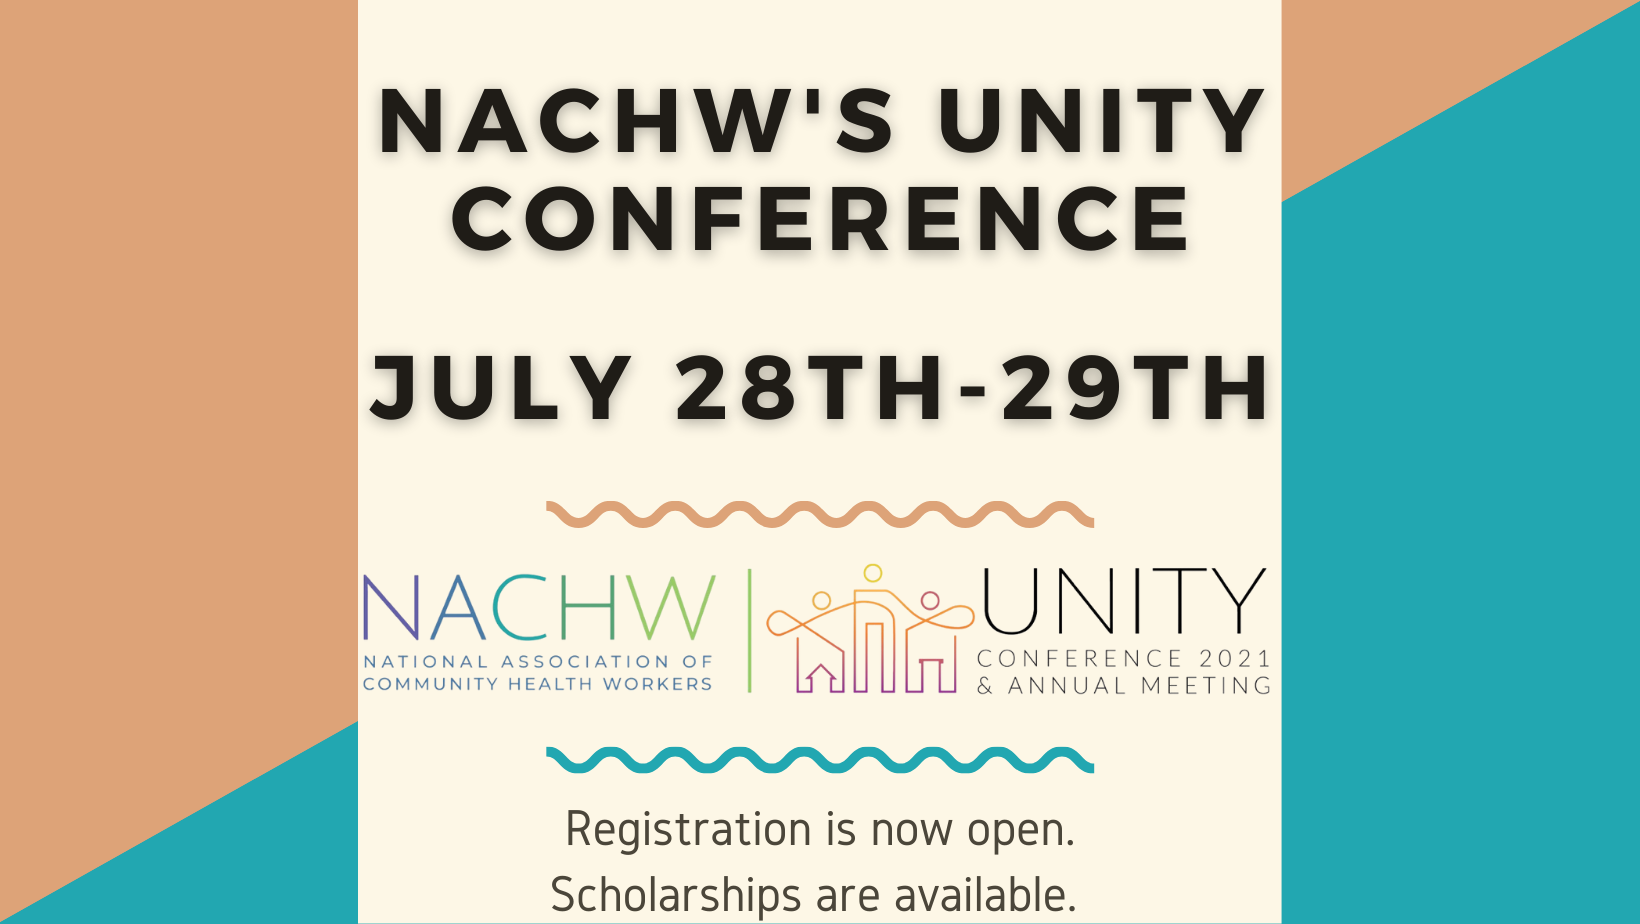 NACHW Conference July 28th-29th